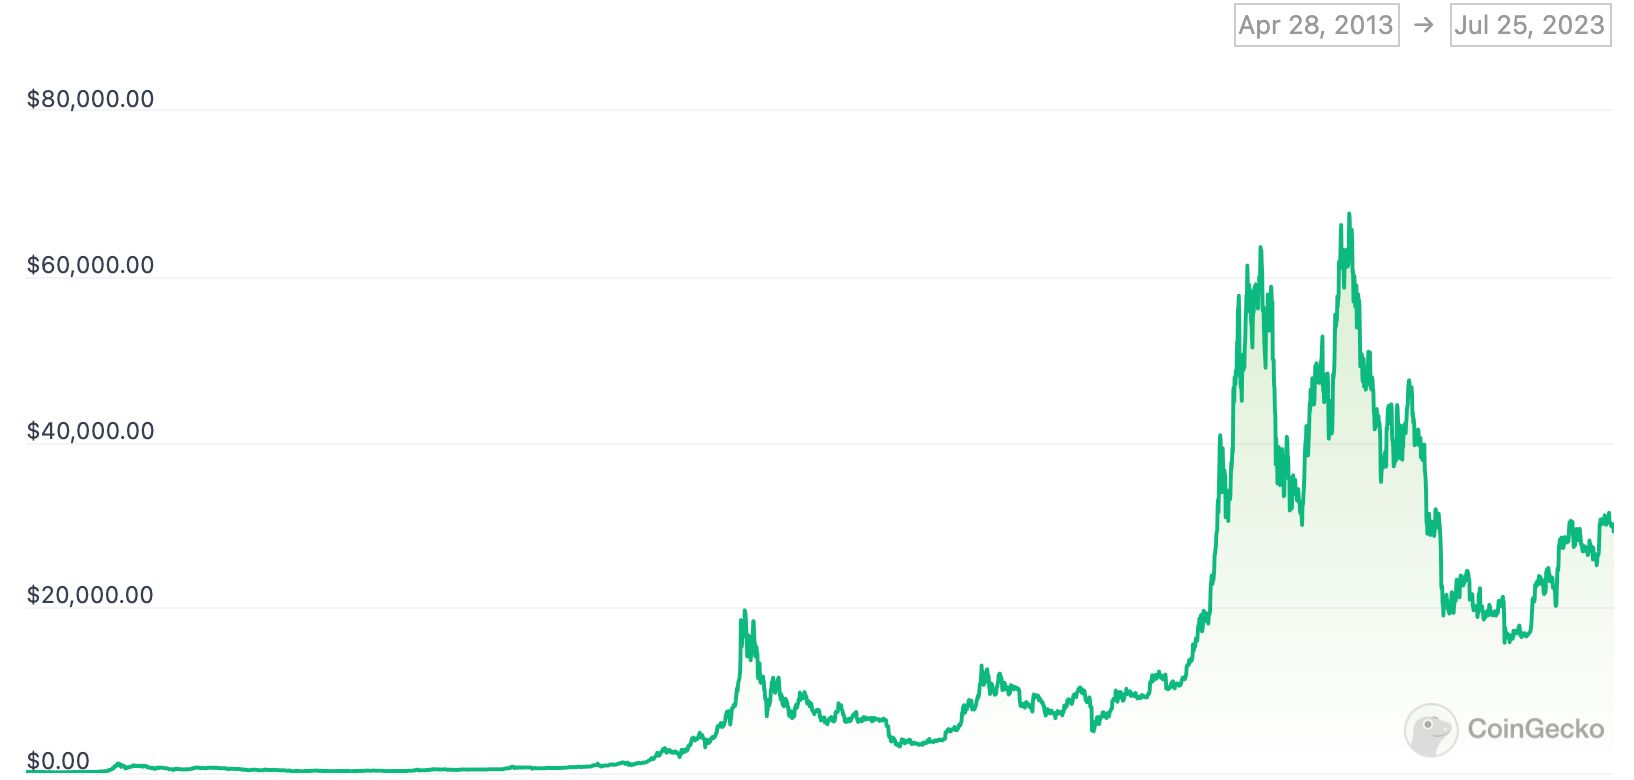 Graph showing Bitcoin price